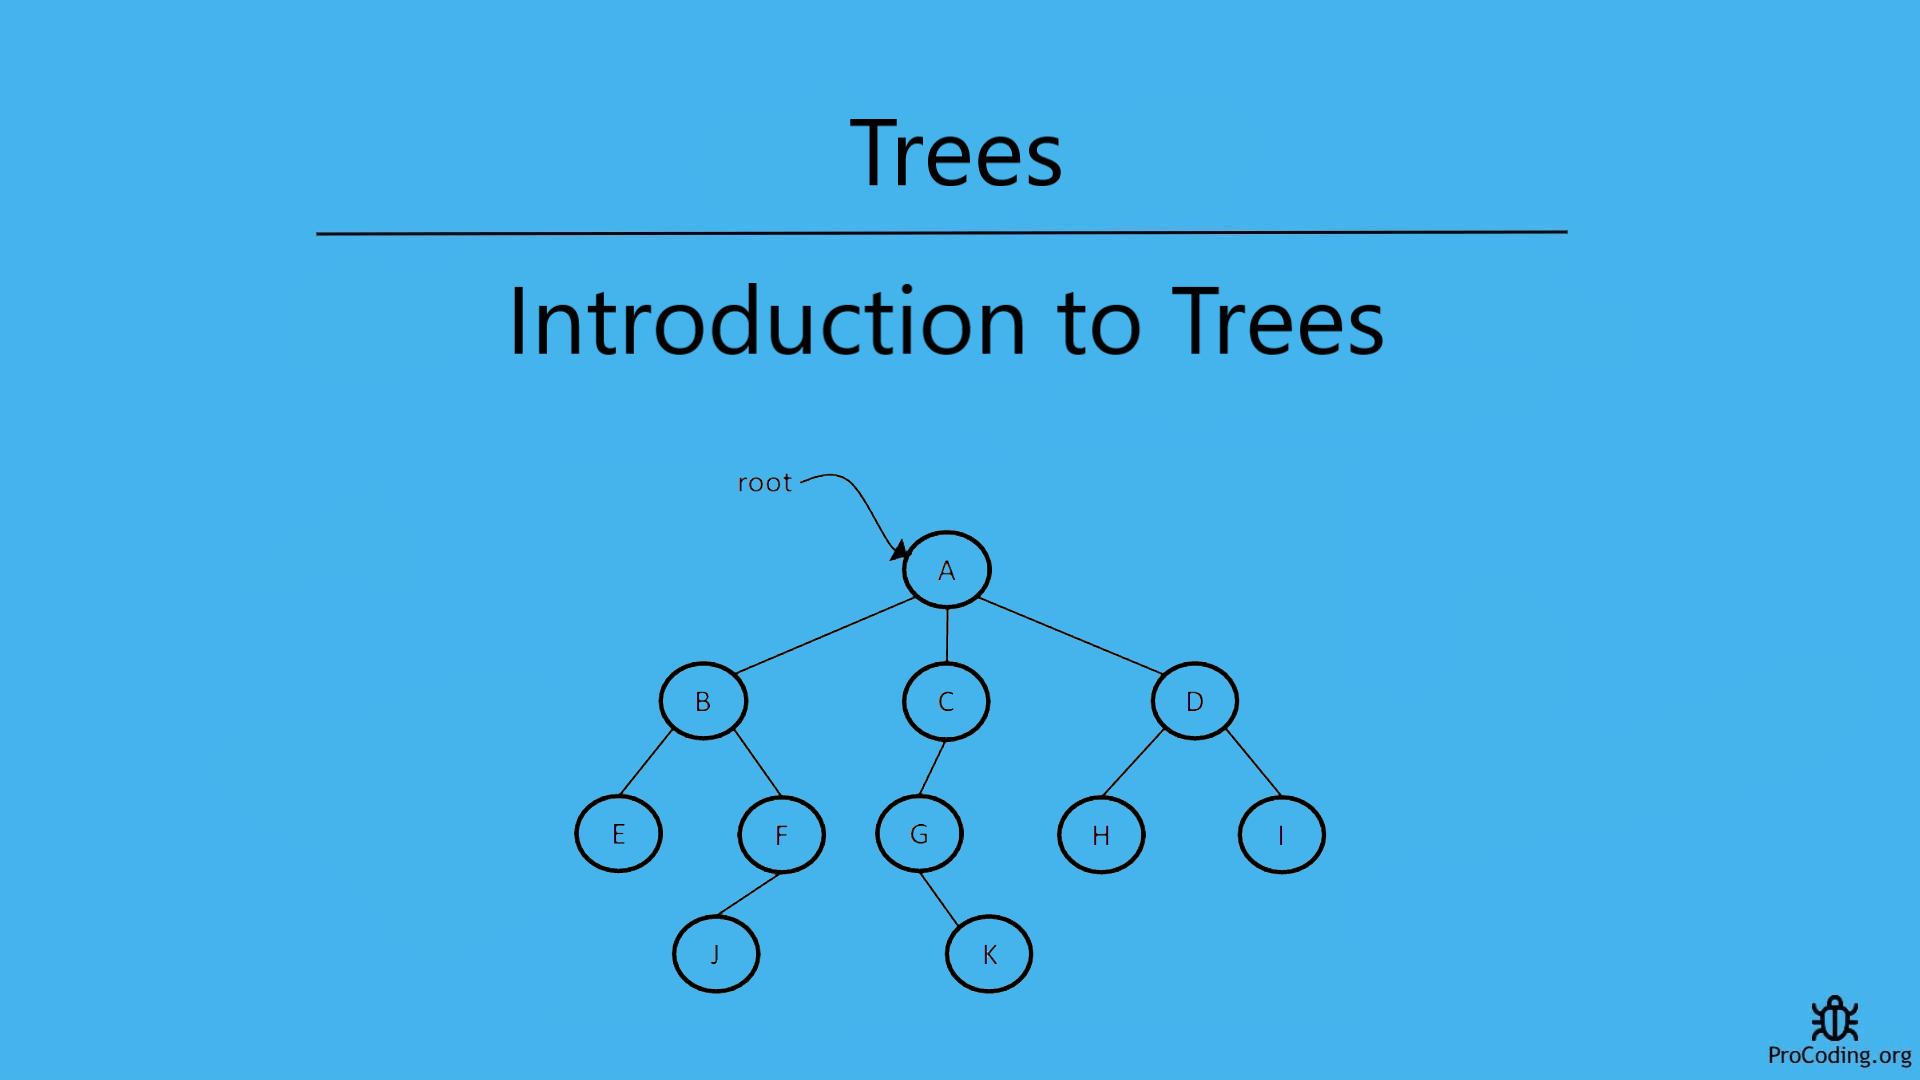 Introduction to trees